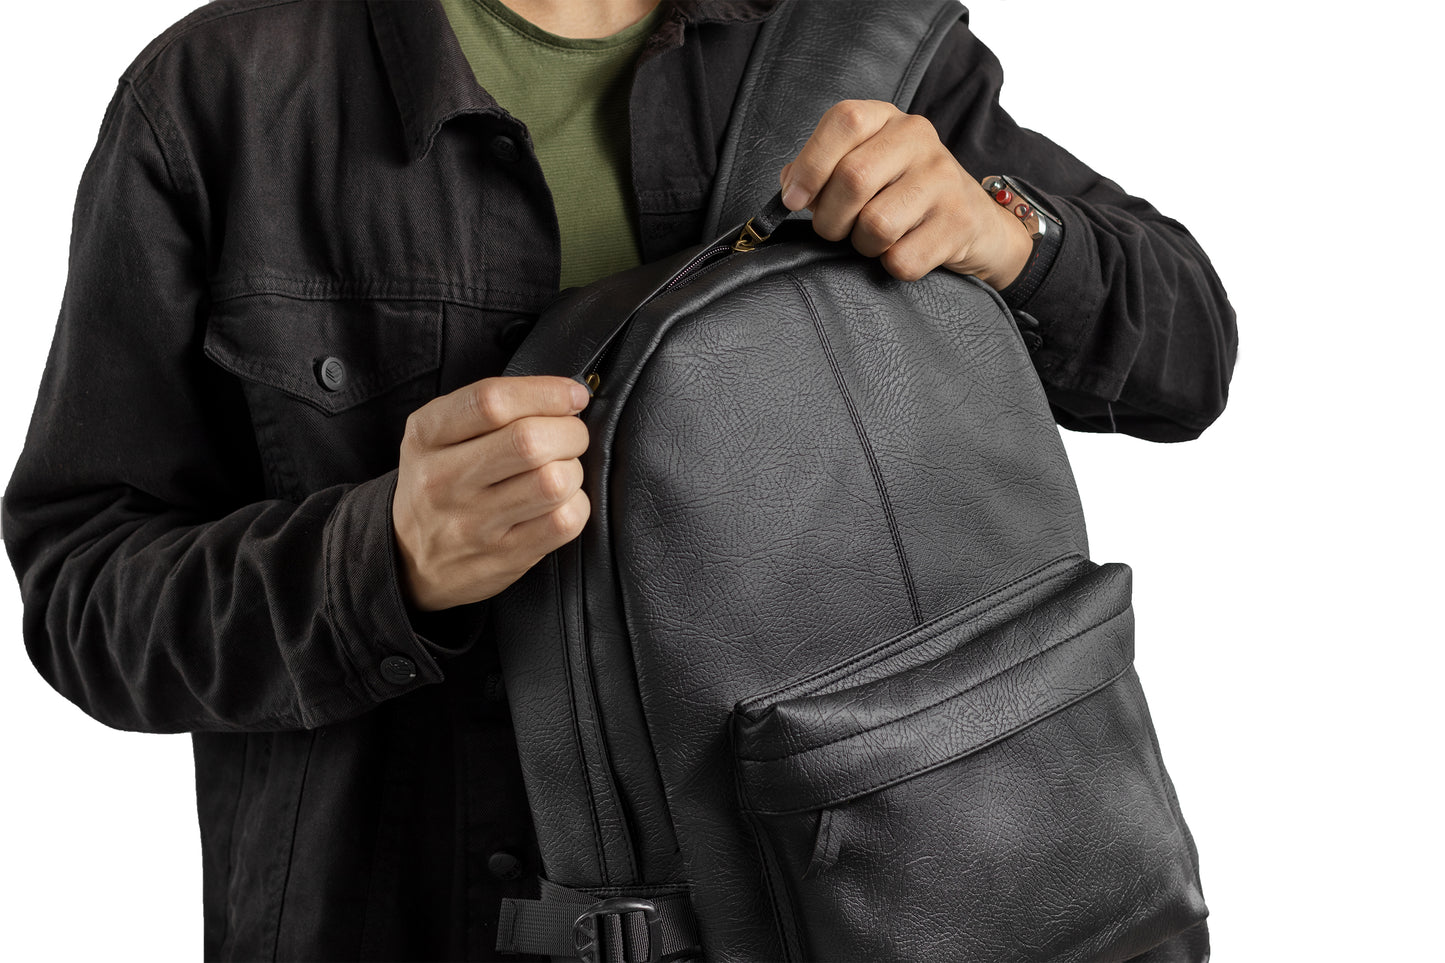 Ar leather backpack